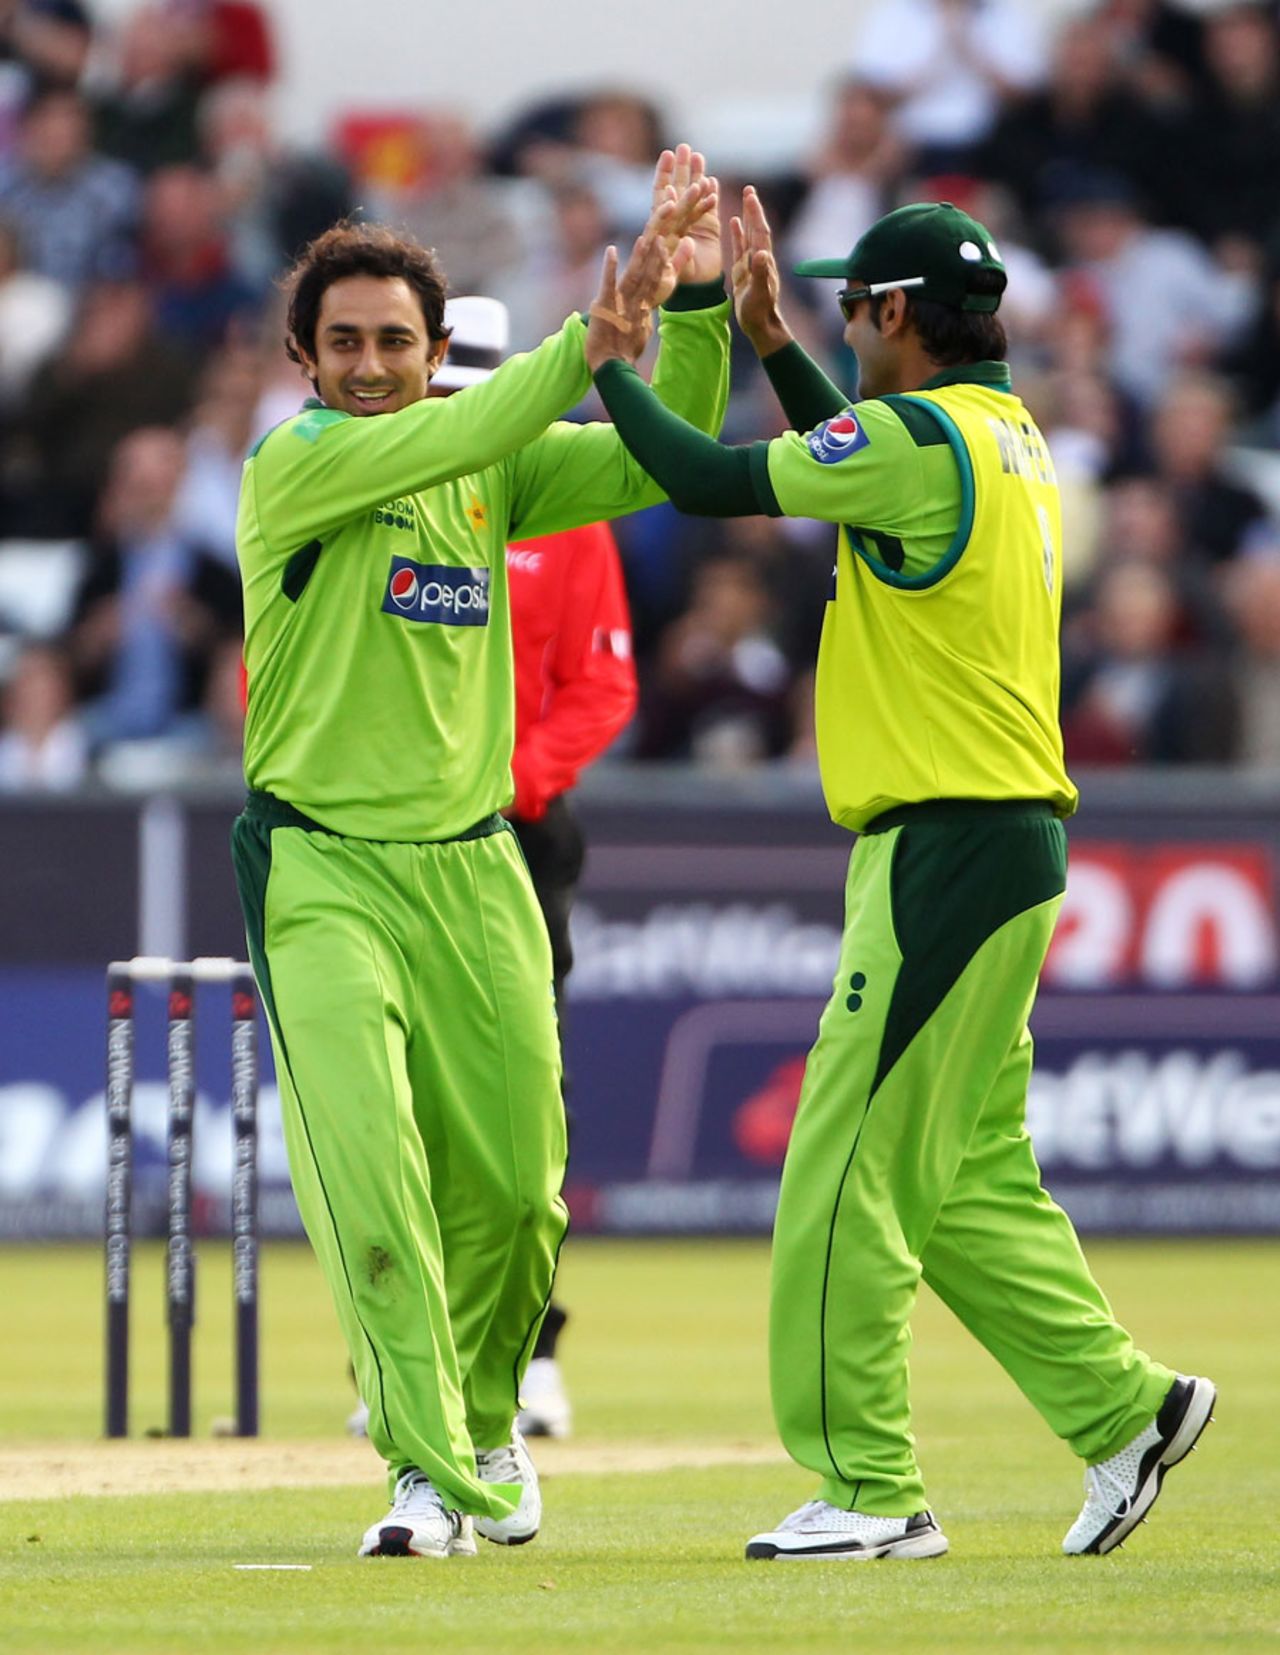 Saeed Ajmal claimed the important wicket of Steven Davies for 87, England v Pakistan, 1st ODI, Chester-le-Street, September 10 2010 